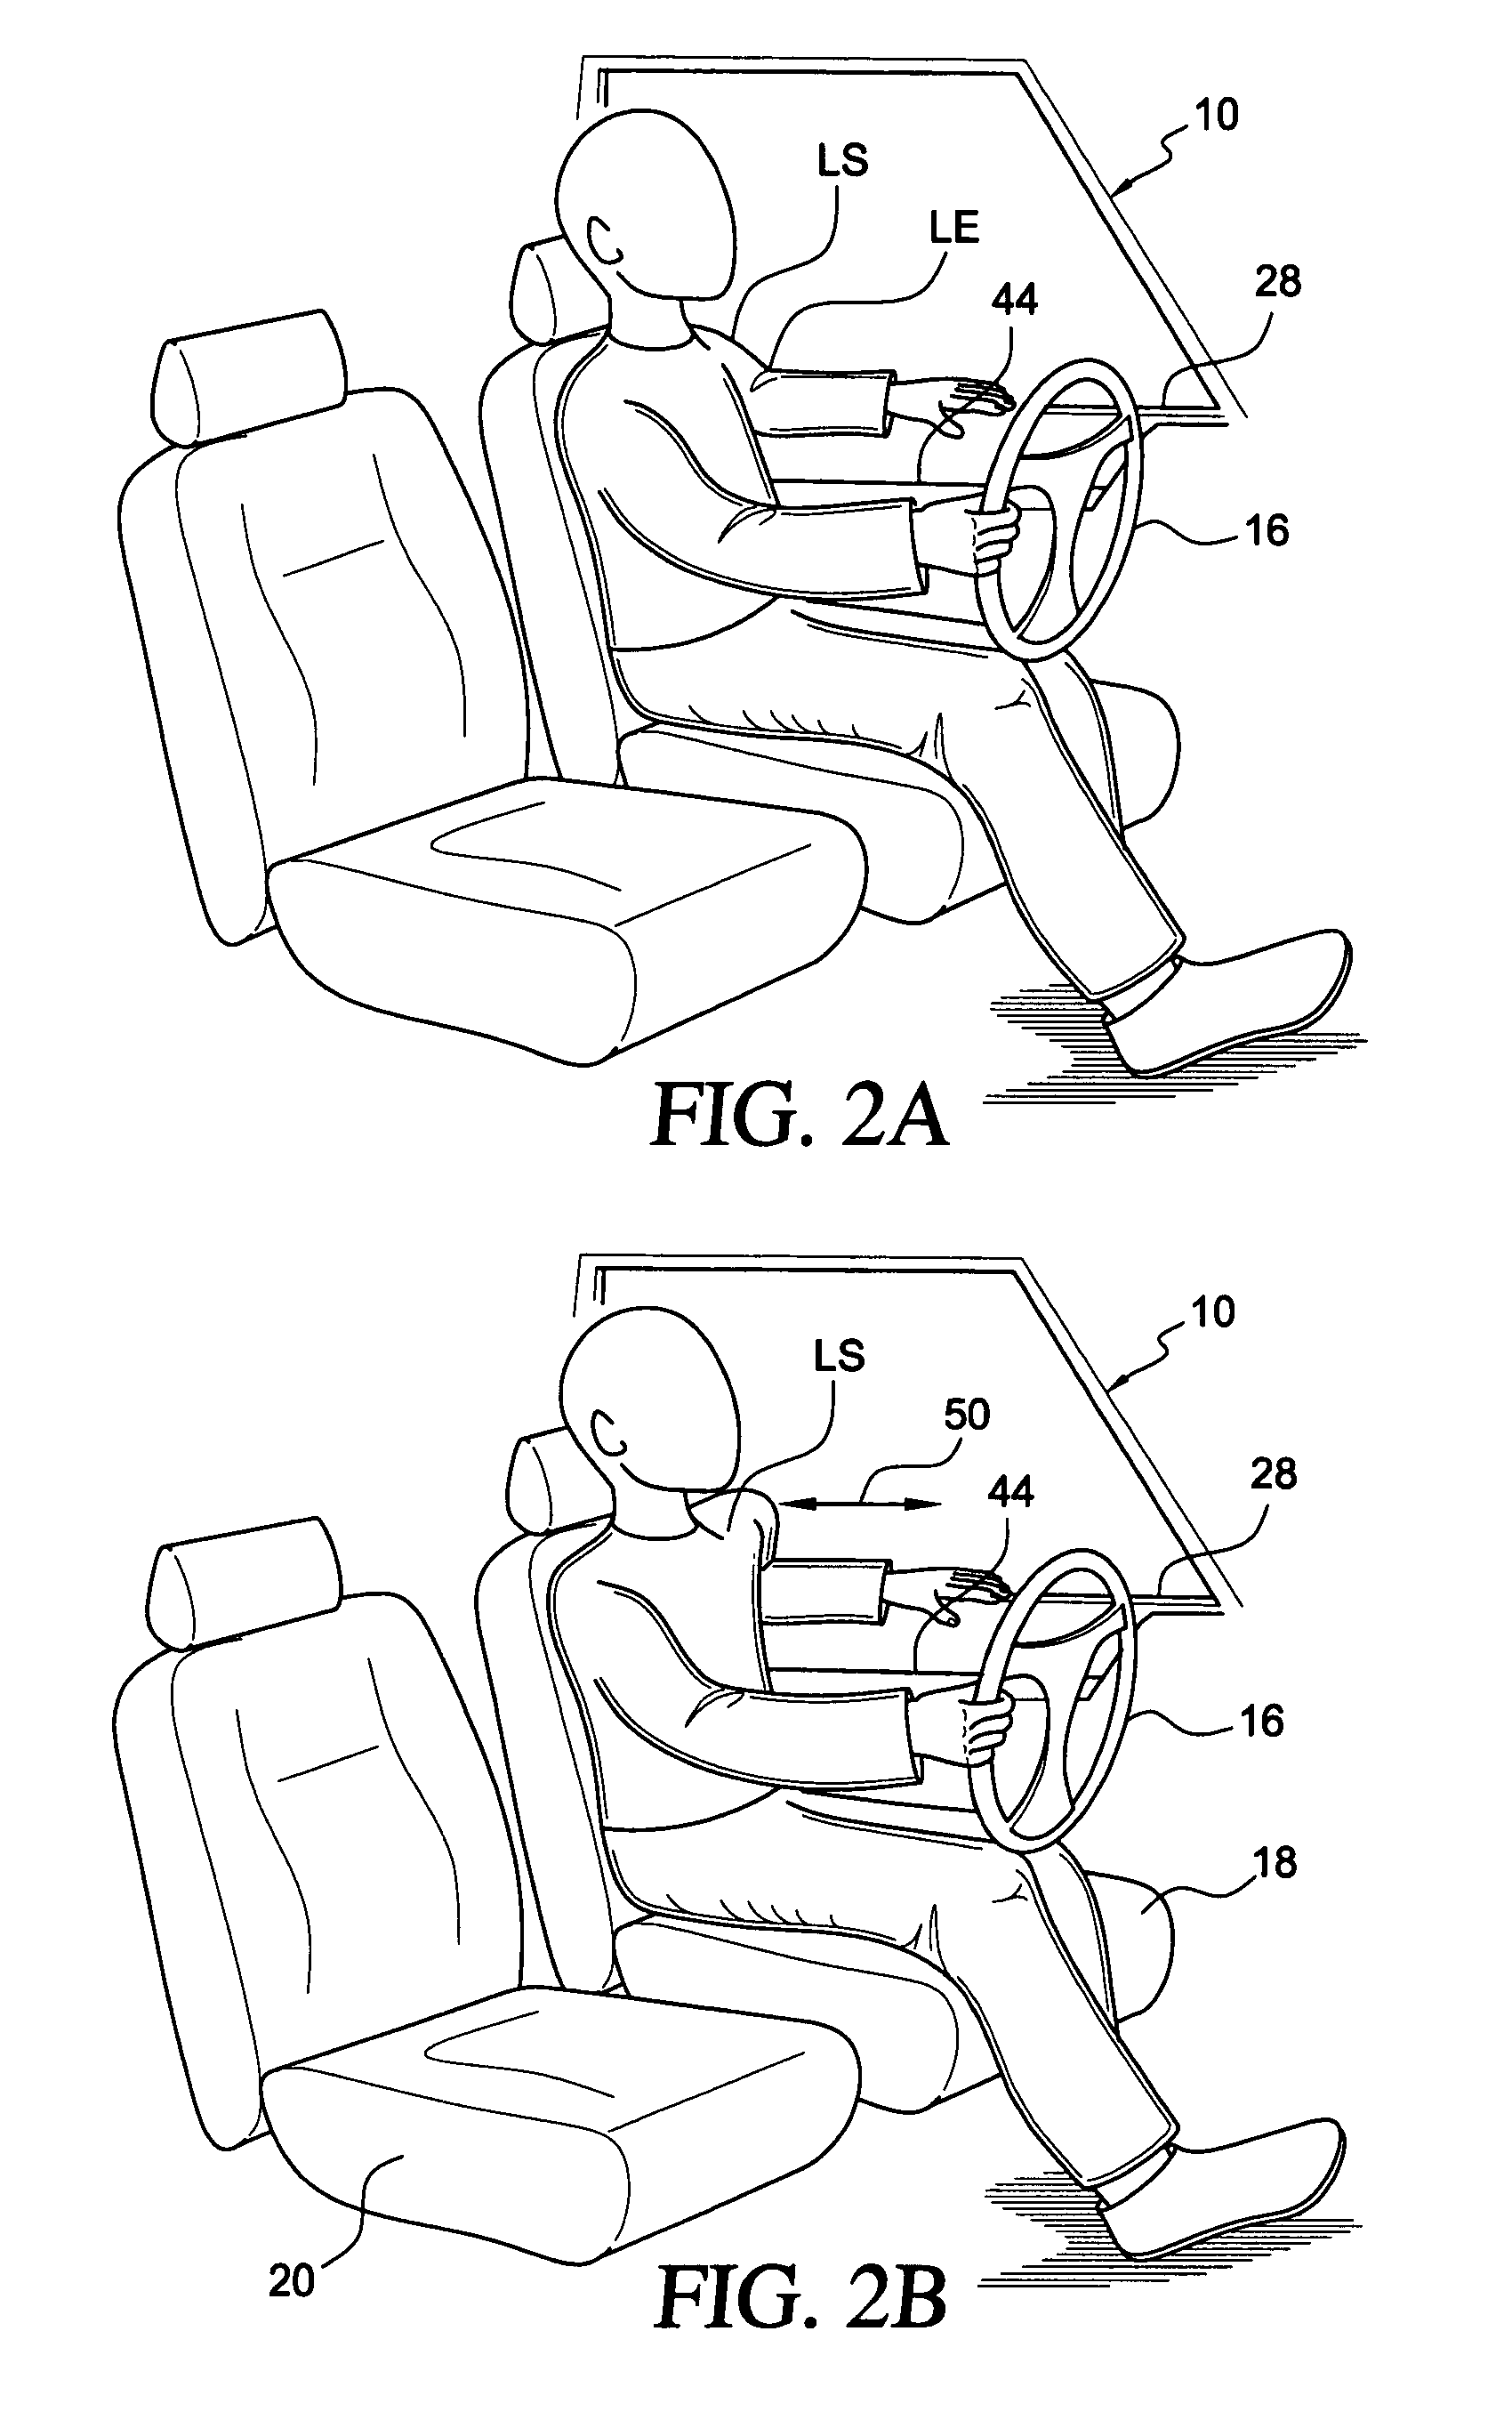 Automobile exercises and method and apparatus for performing the same